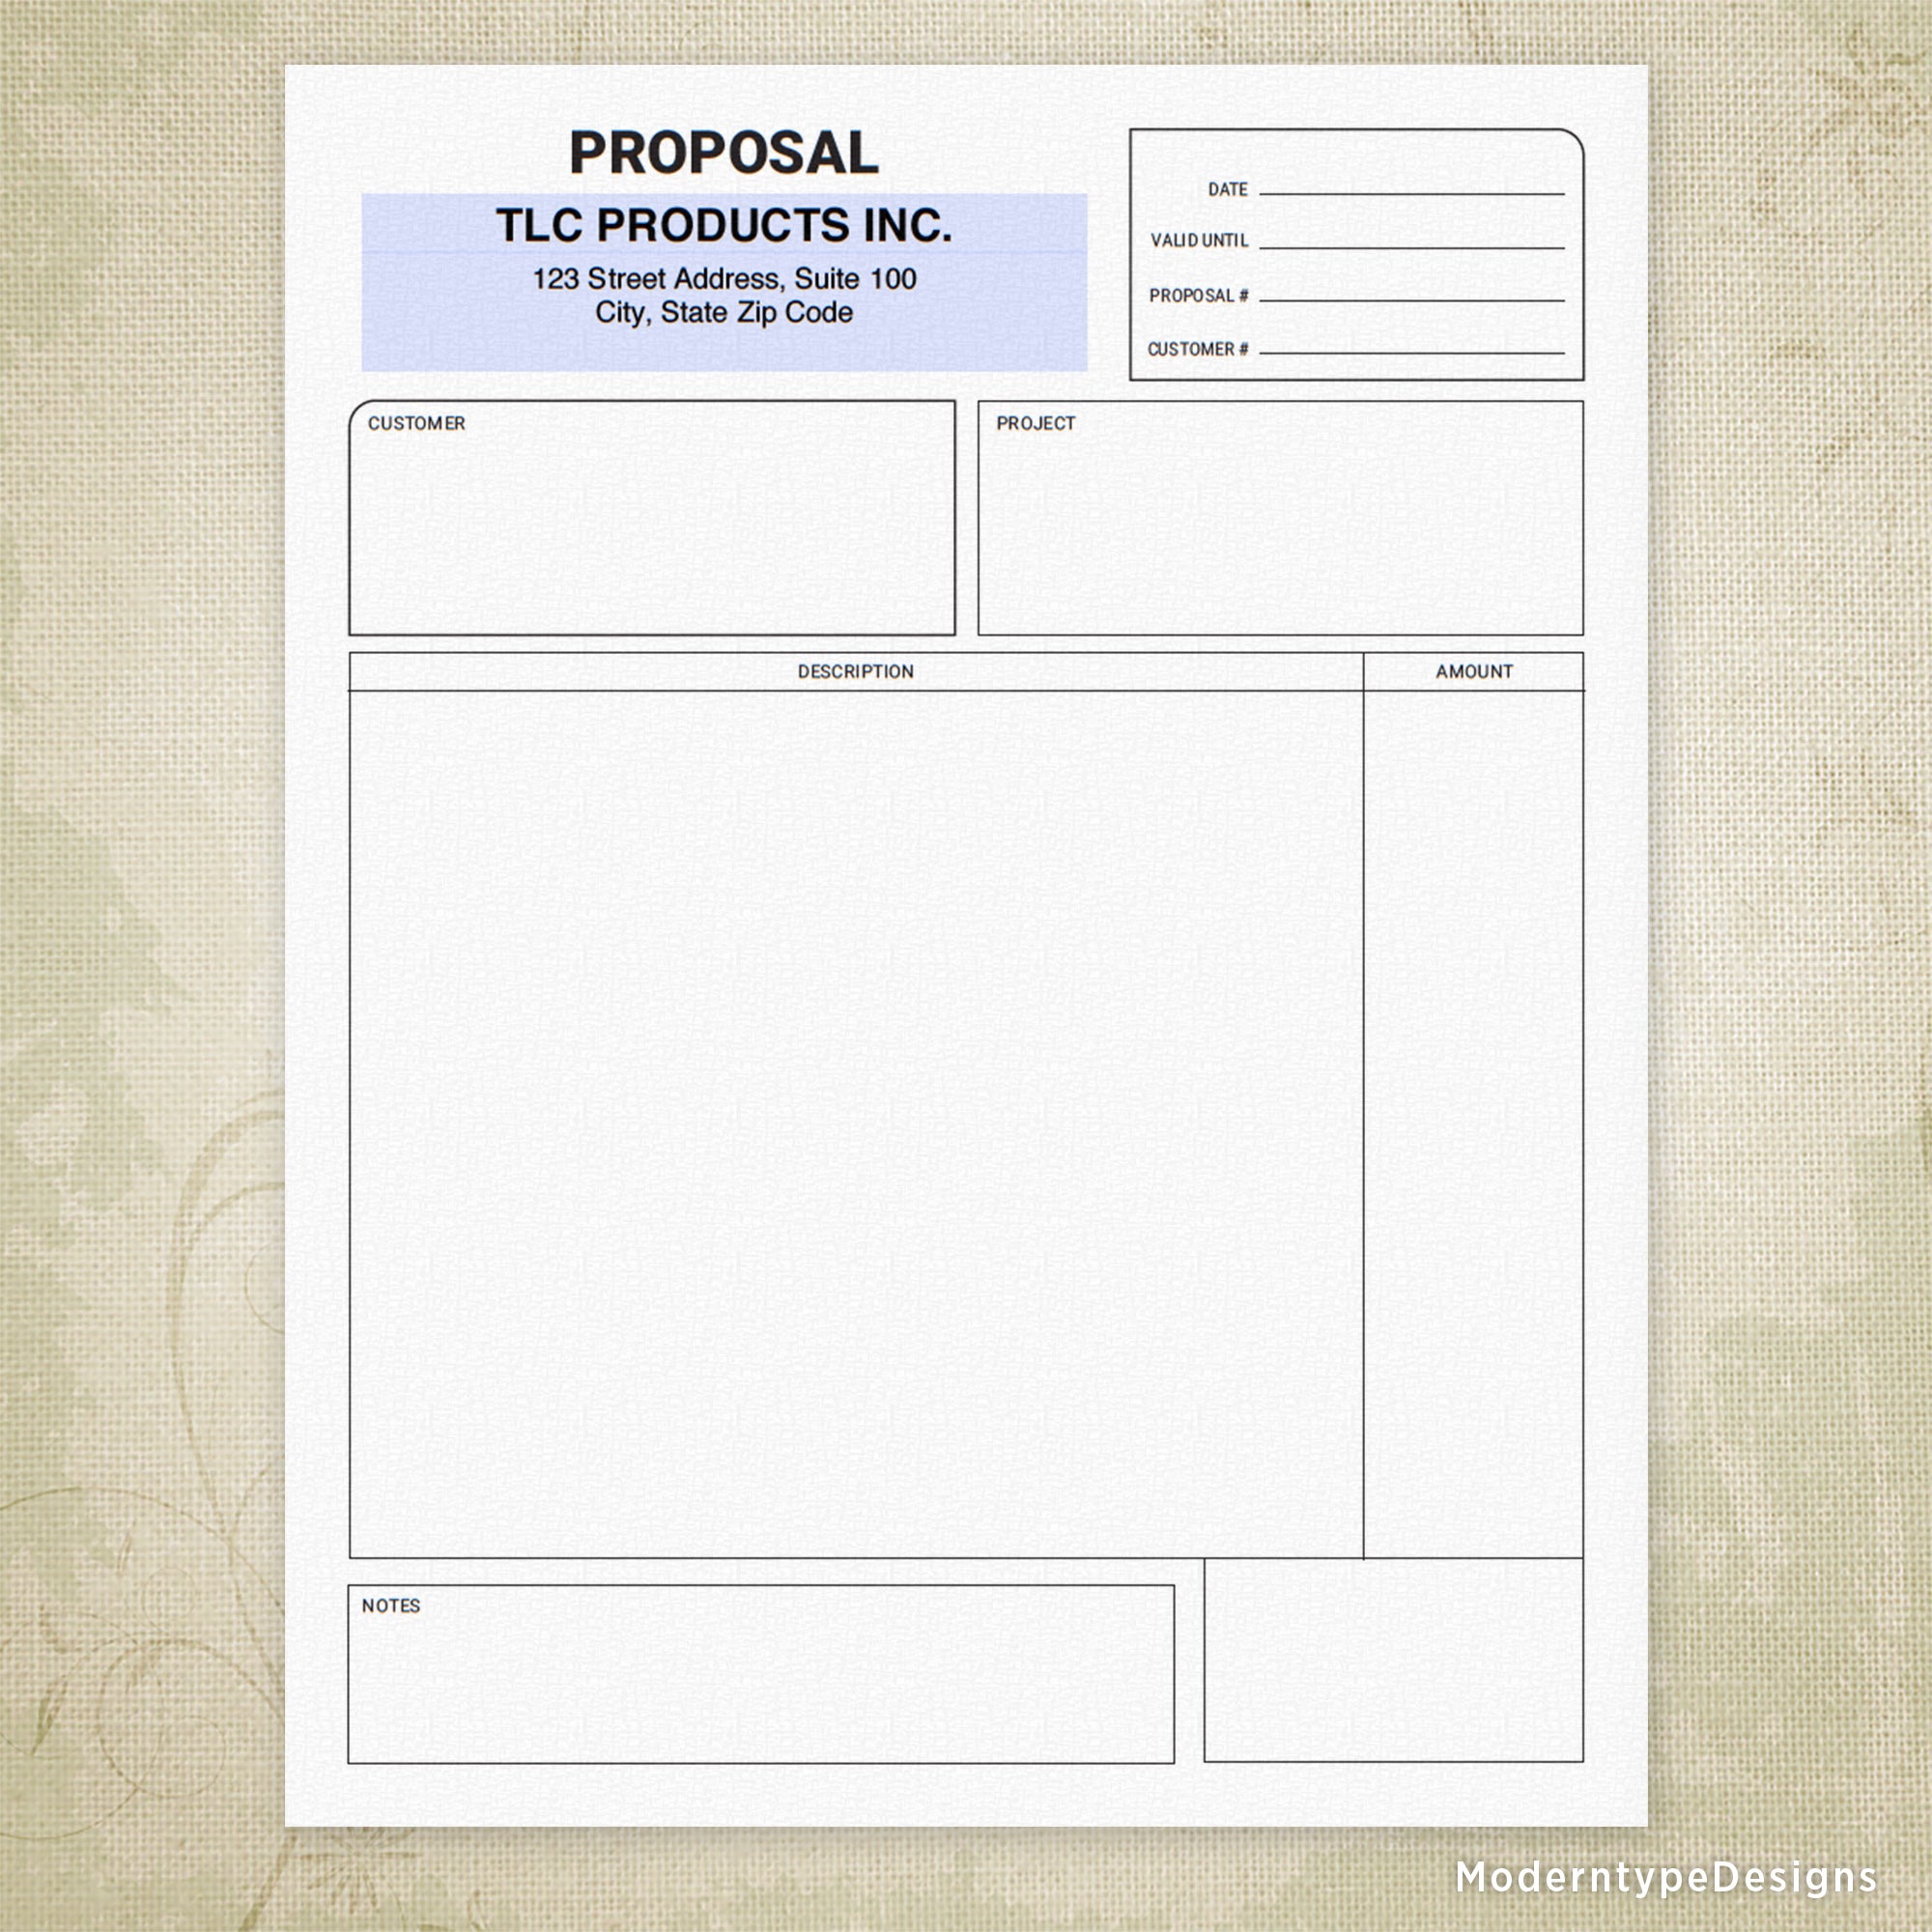 Proposal Printable Form, Personalized